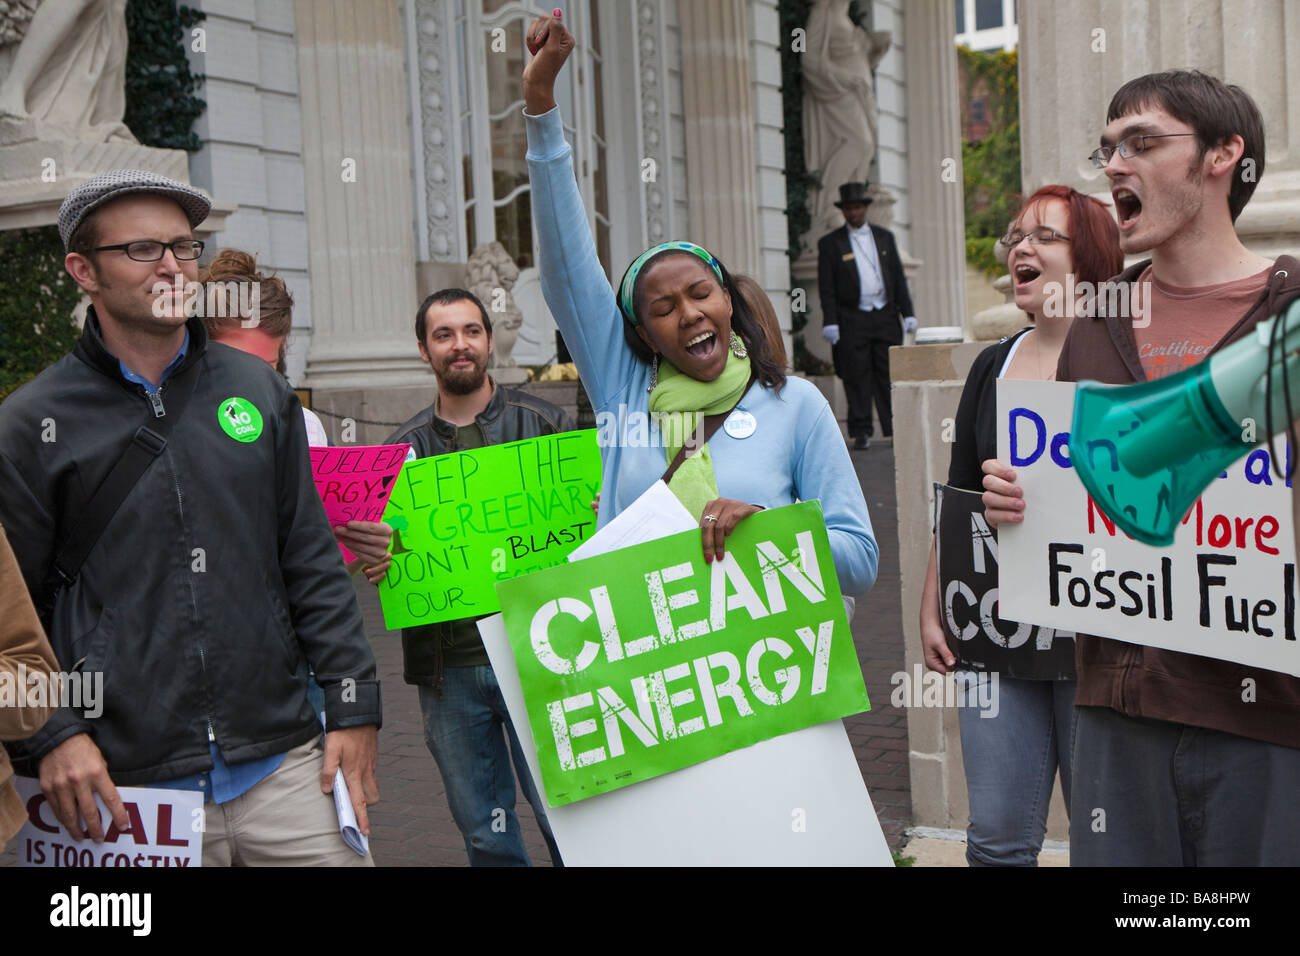 Environmentalists Protest Plans for Coal-Burning Power Plant Stock Photo